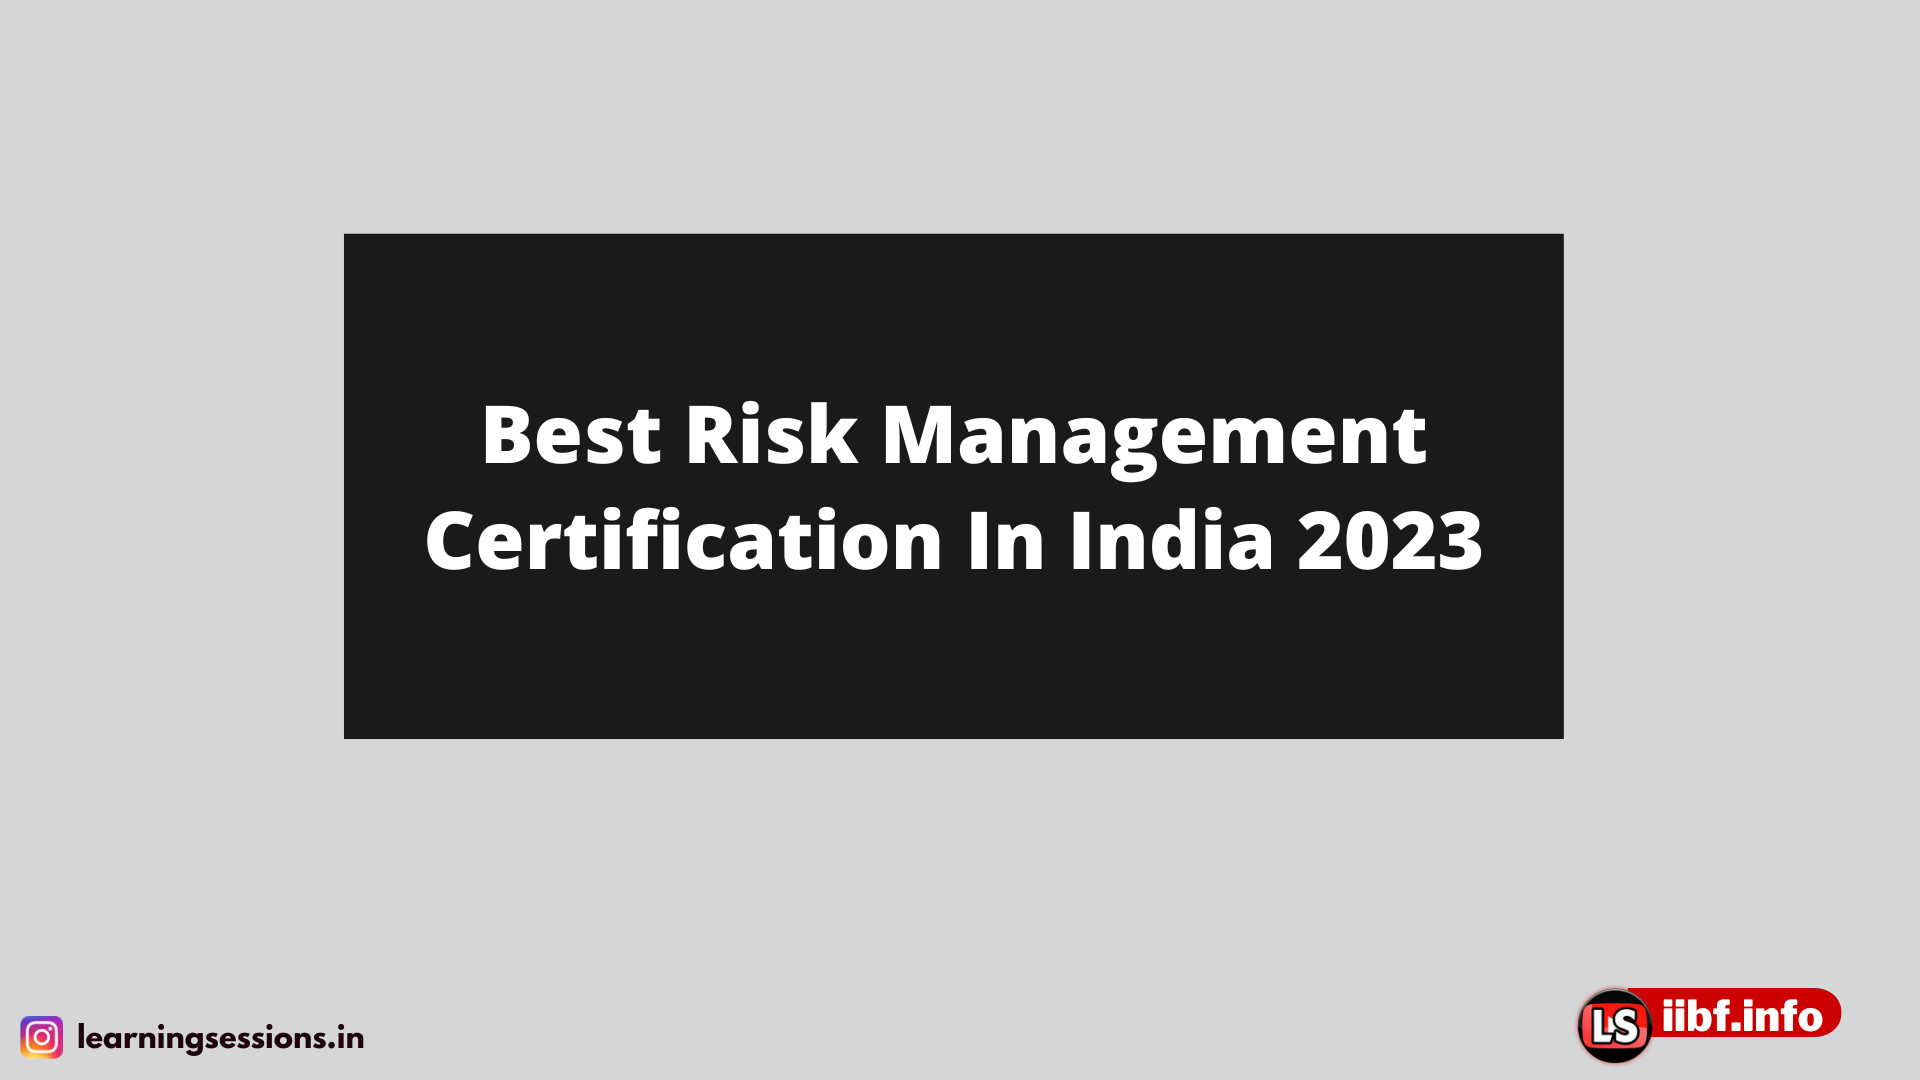 Best Risk Management Certification In India 2022